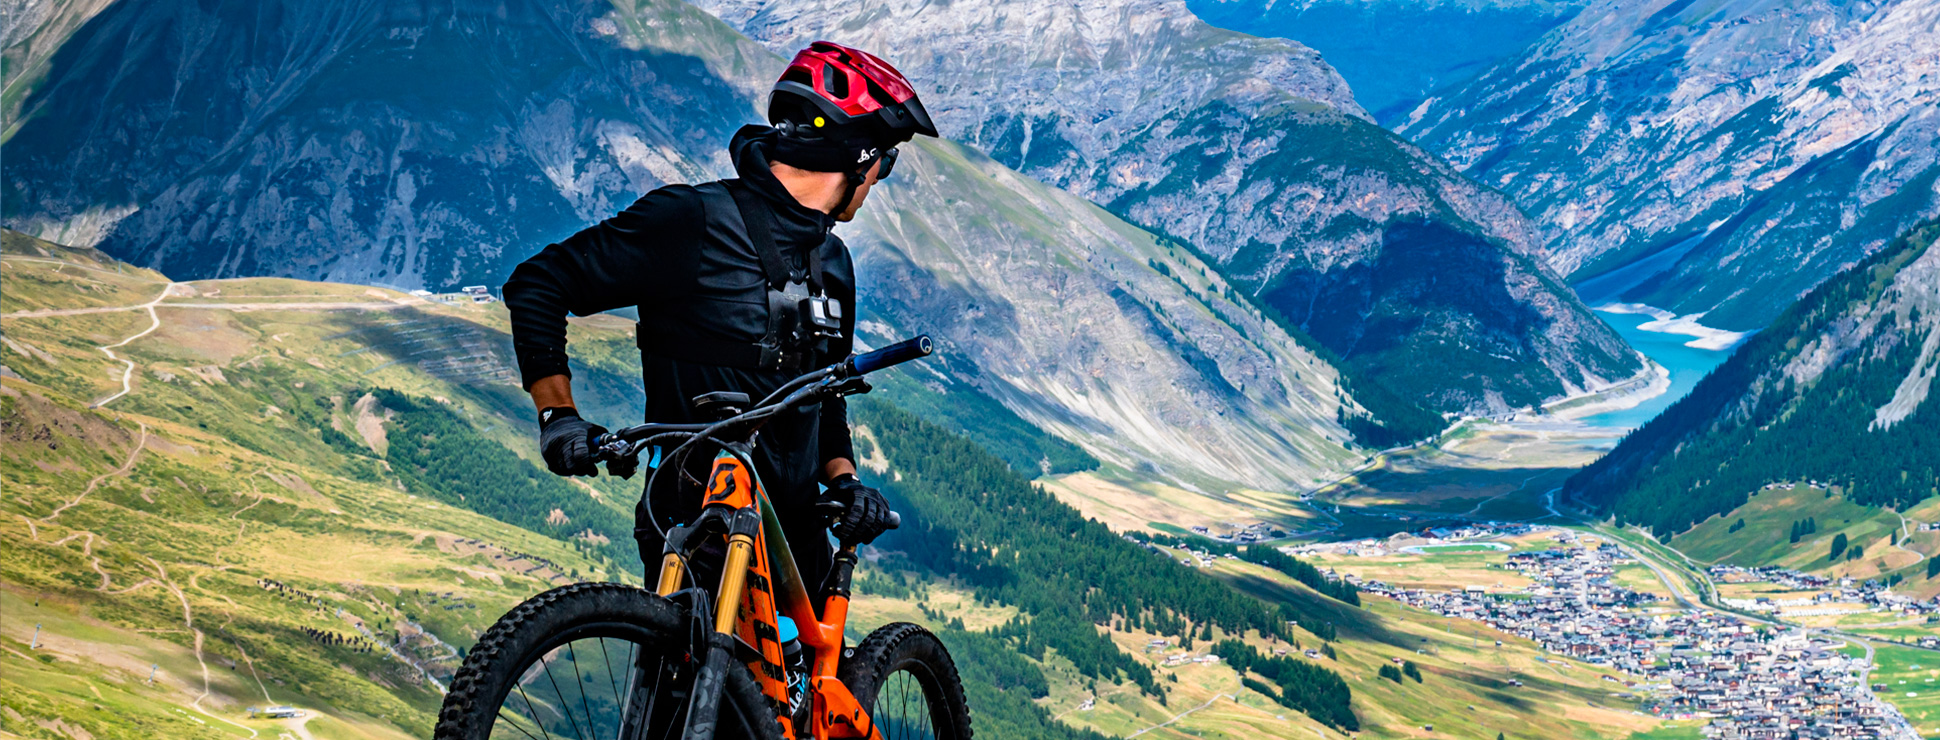 Bikers with a View of the Livigno Valley